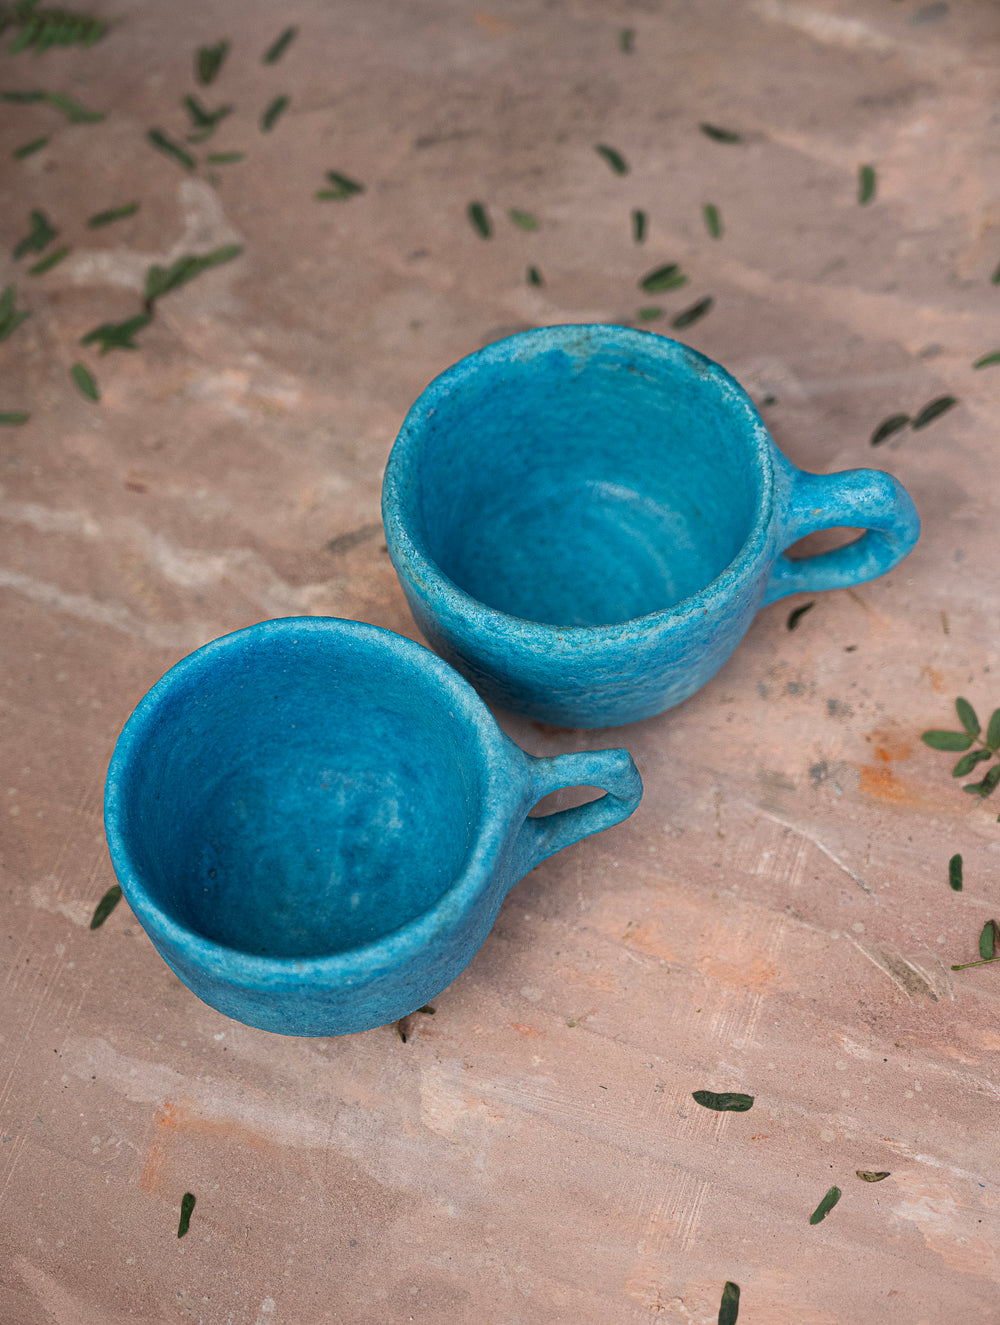 Load image into Gallery viewer, Delhi Blue Art Pottery Curios, Teacups (Set of 2)